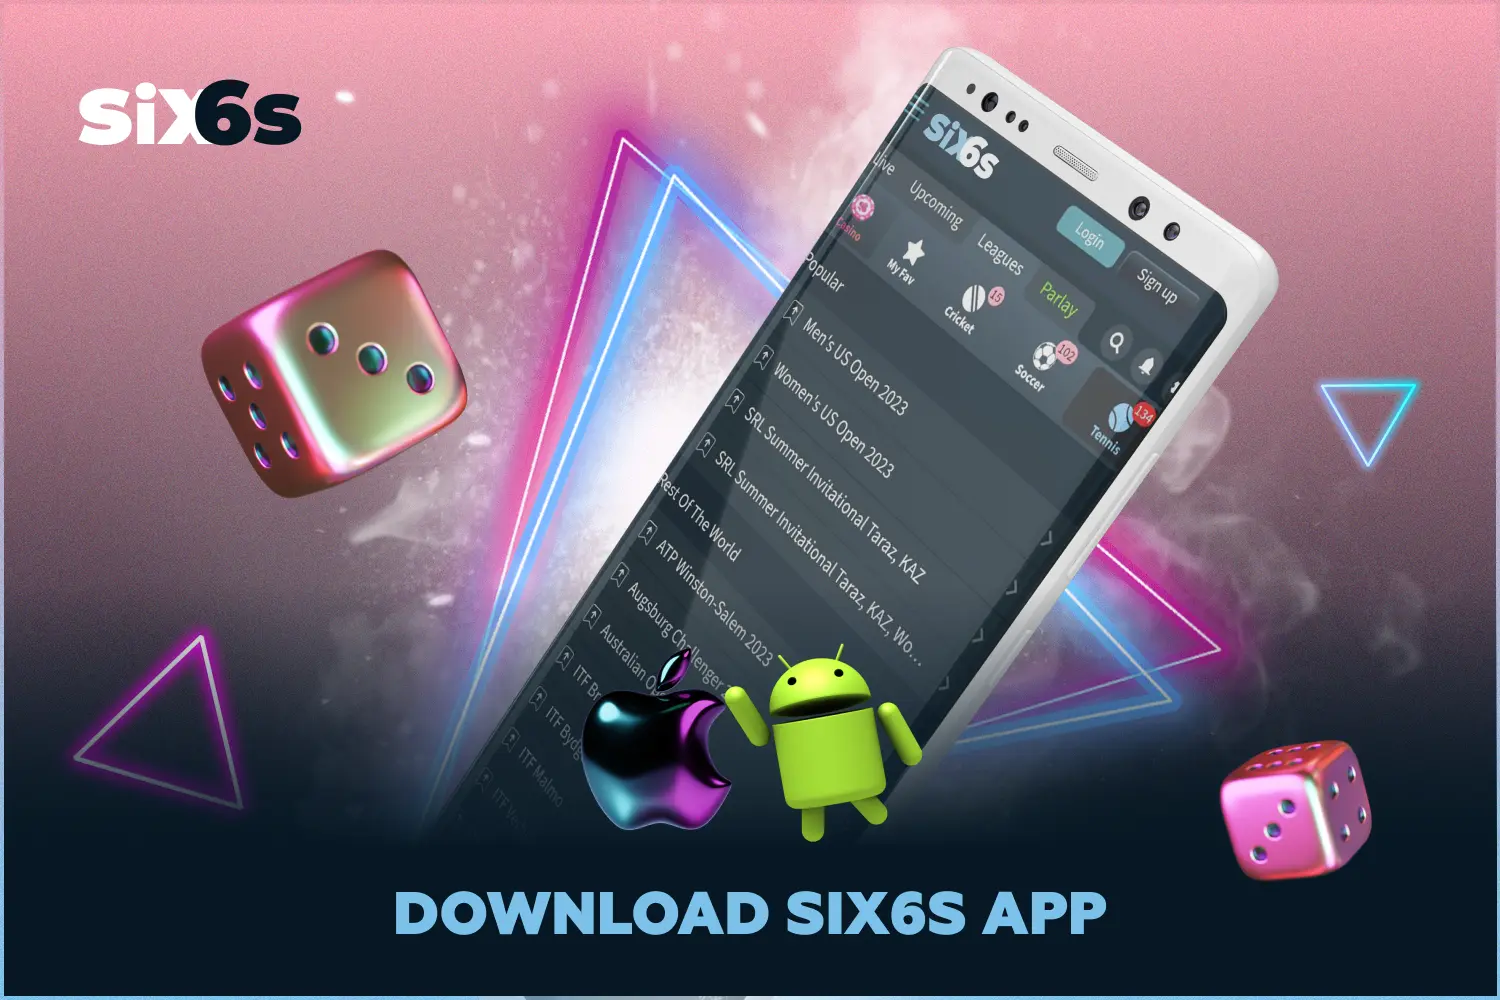 Users around the world can download the latest version of the Six6s app for free